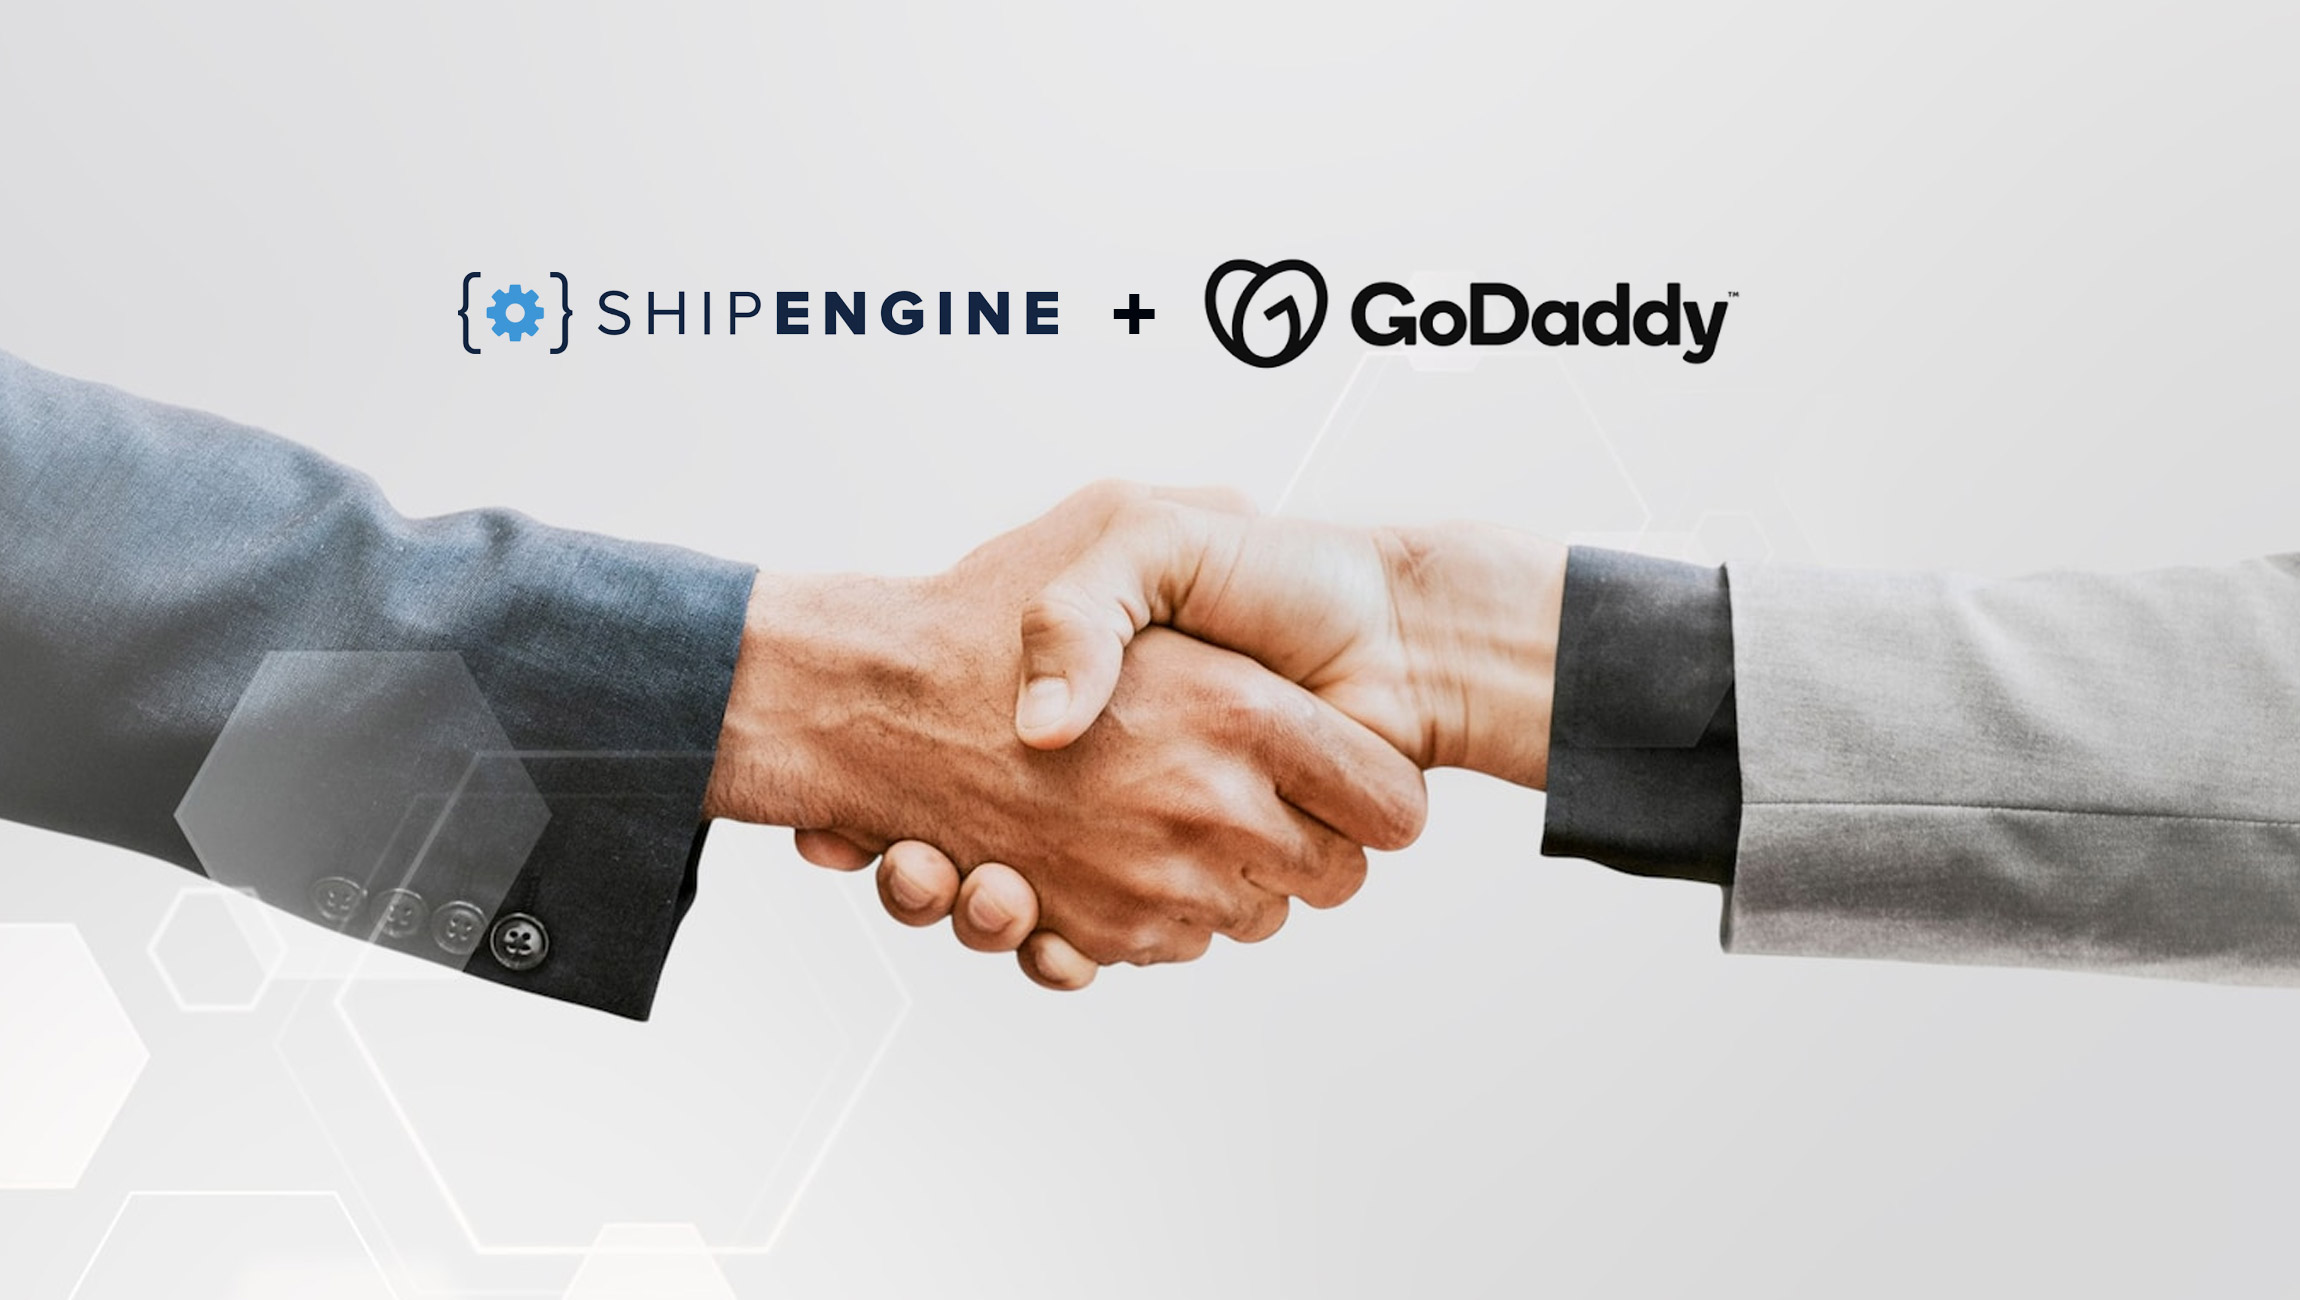 ShipEngine Partners With GoDaddy to Provide Discounted Shipping to Small Businesses